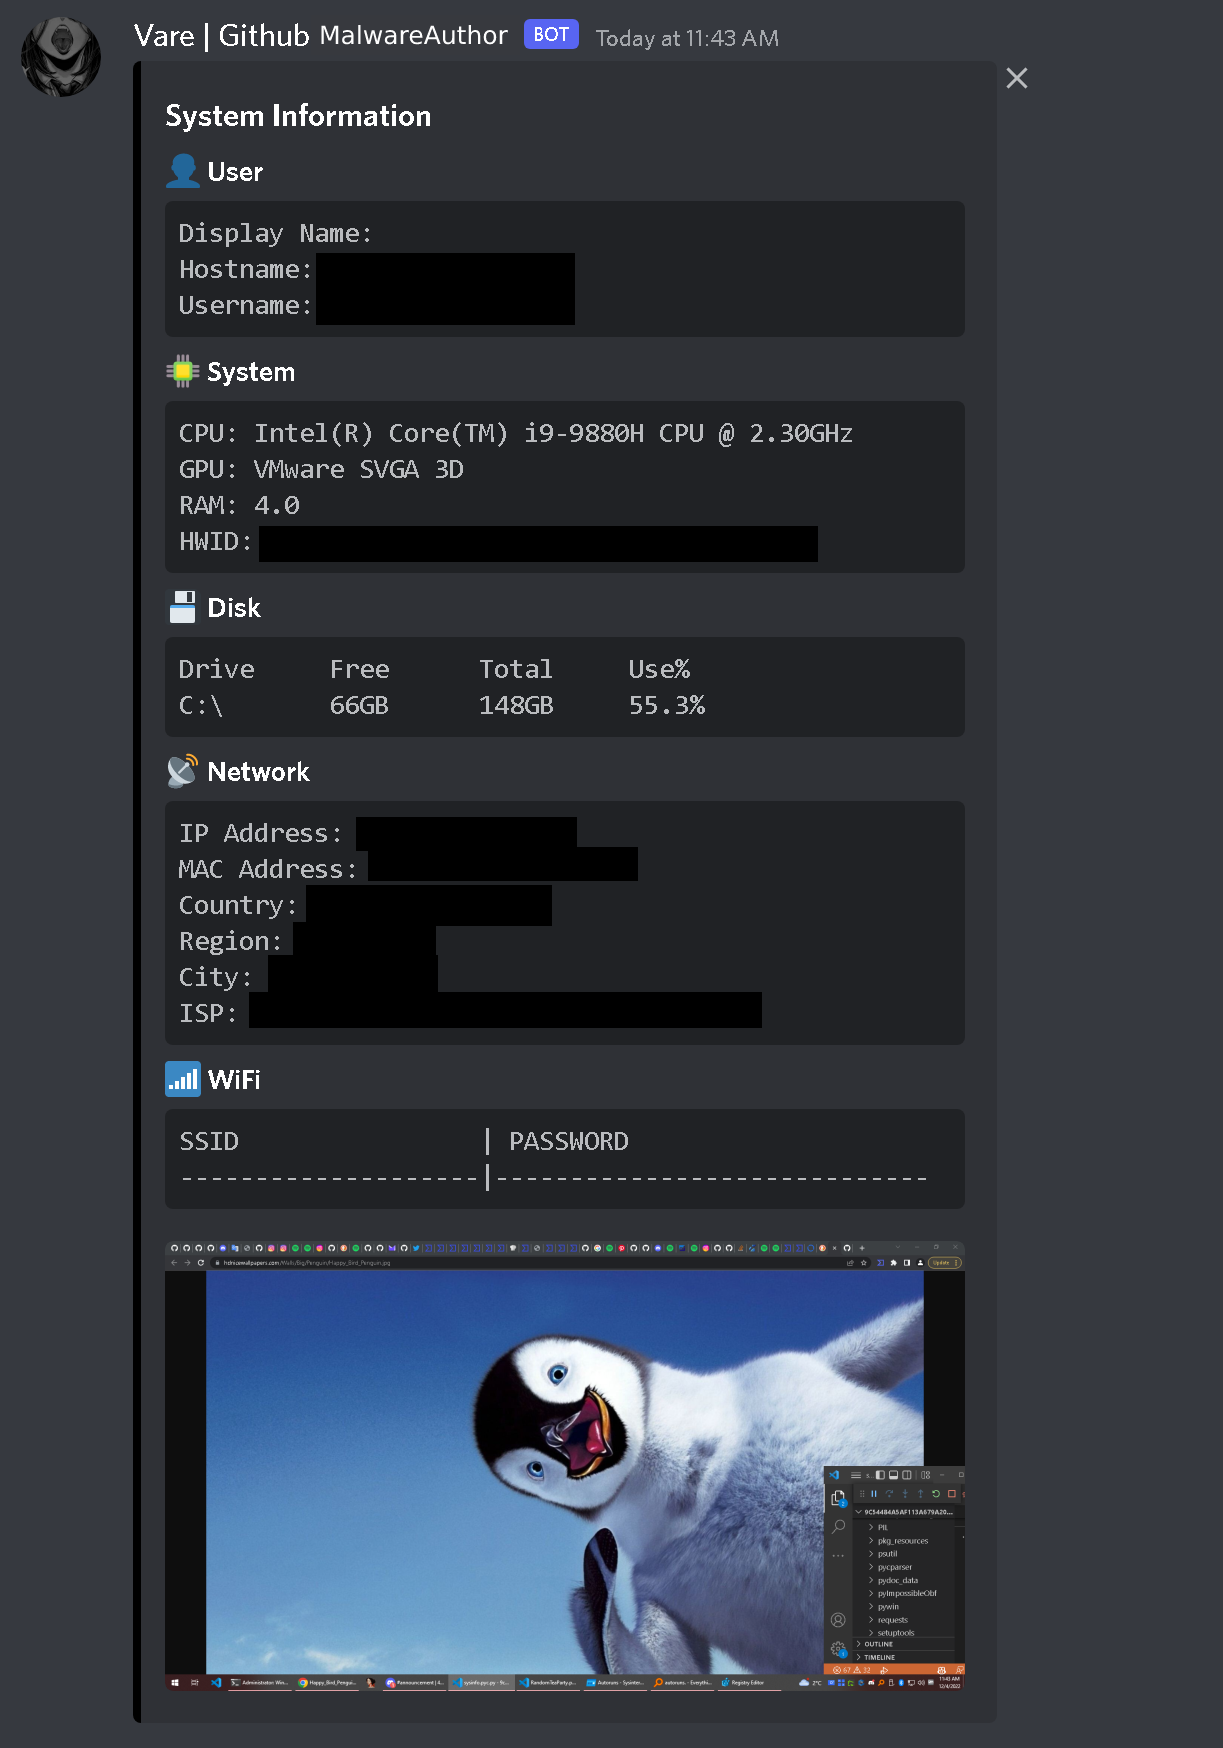 Malware on Discord and how to protect oneself